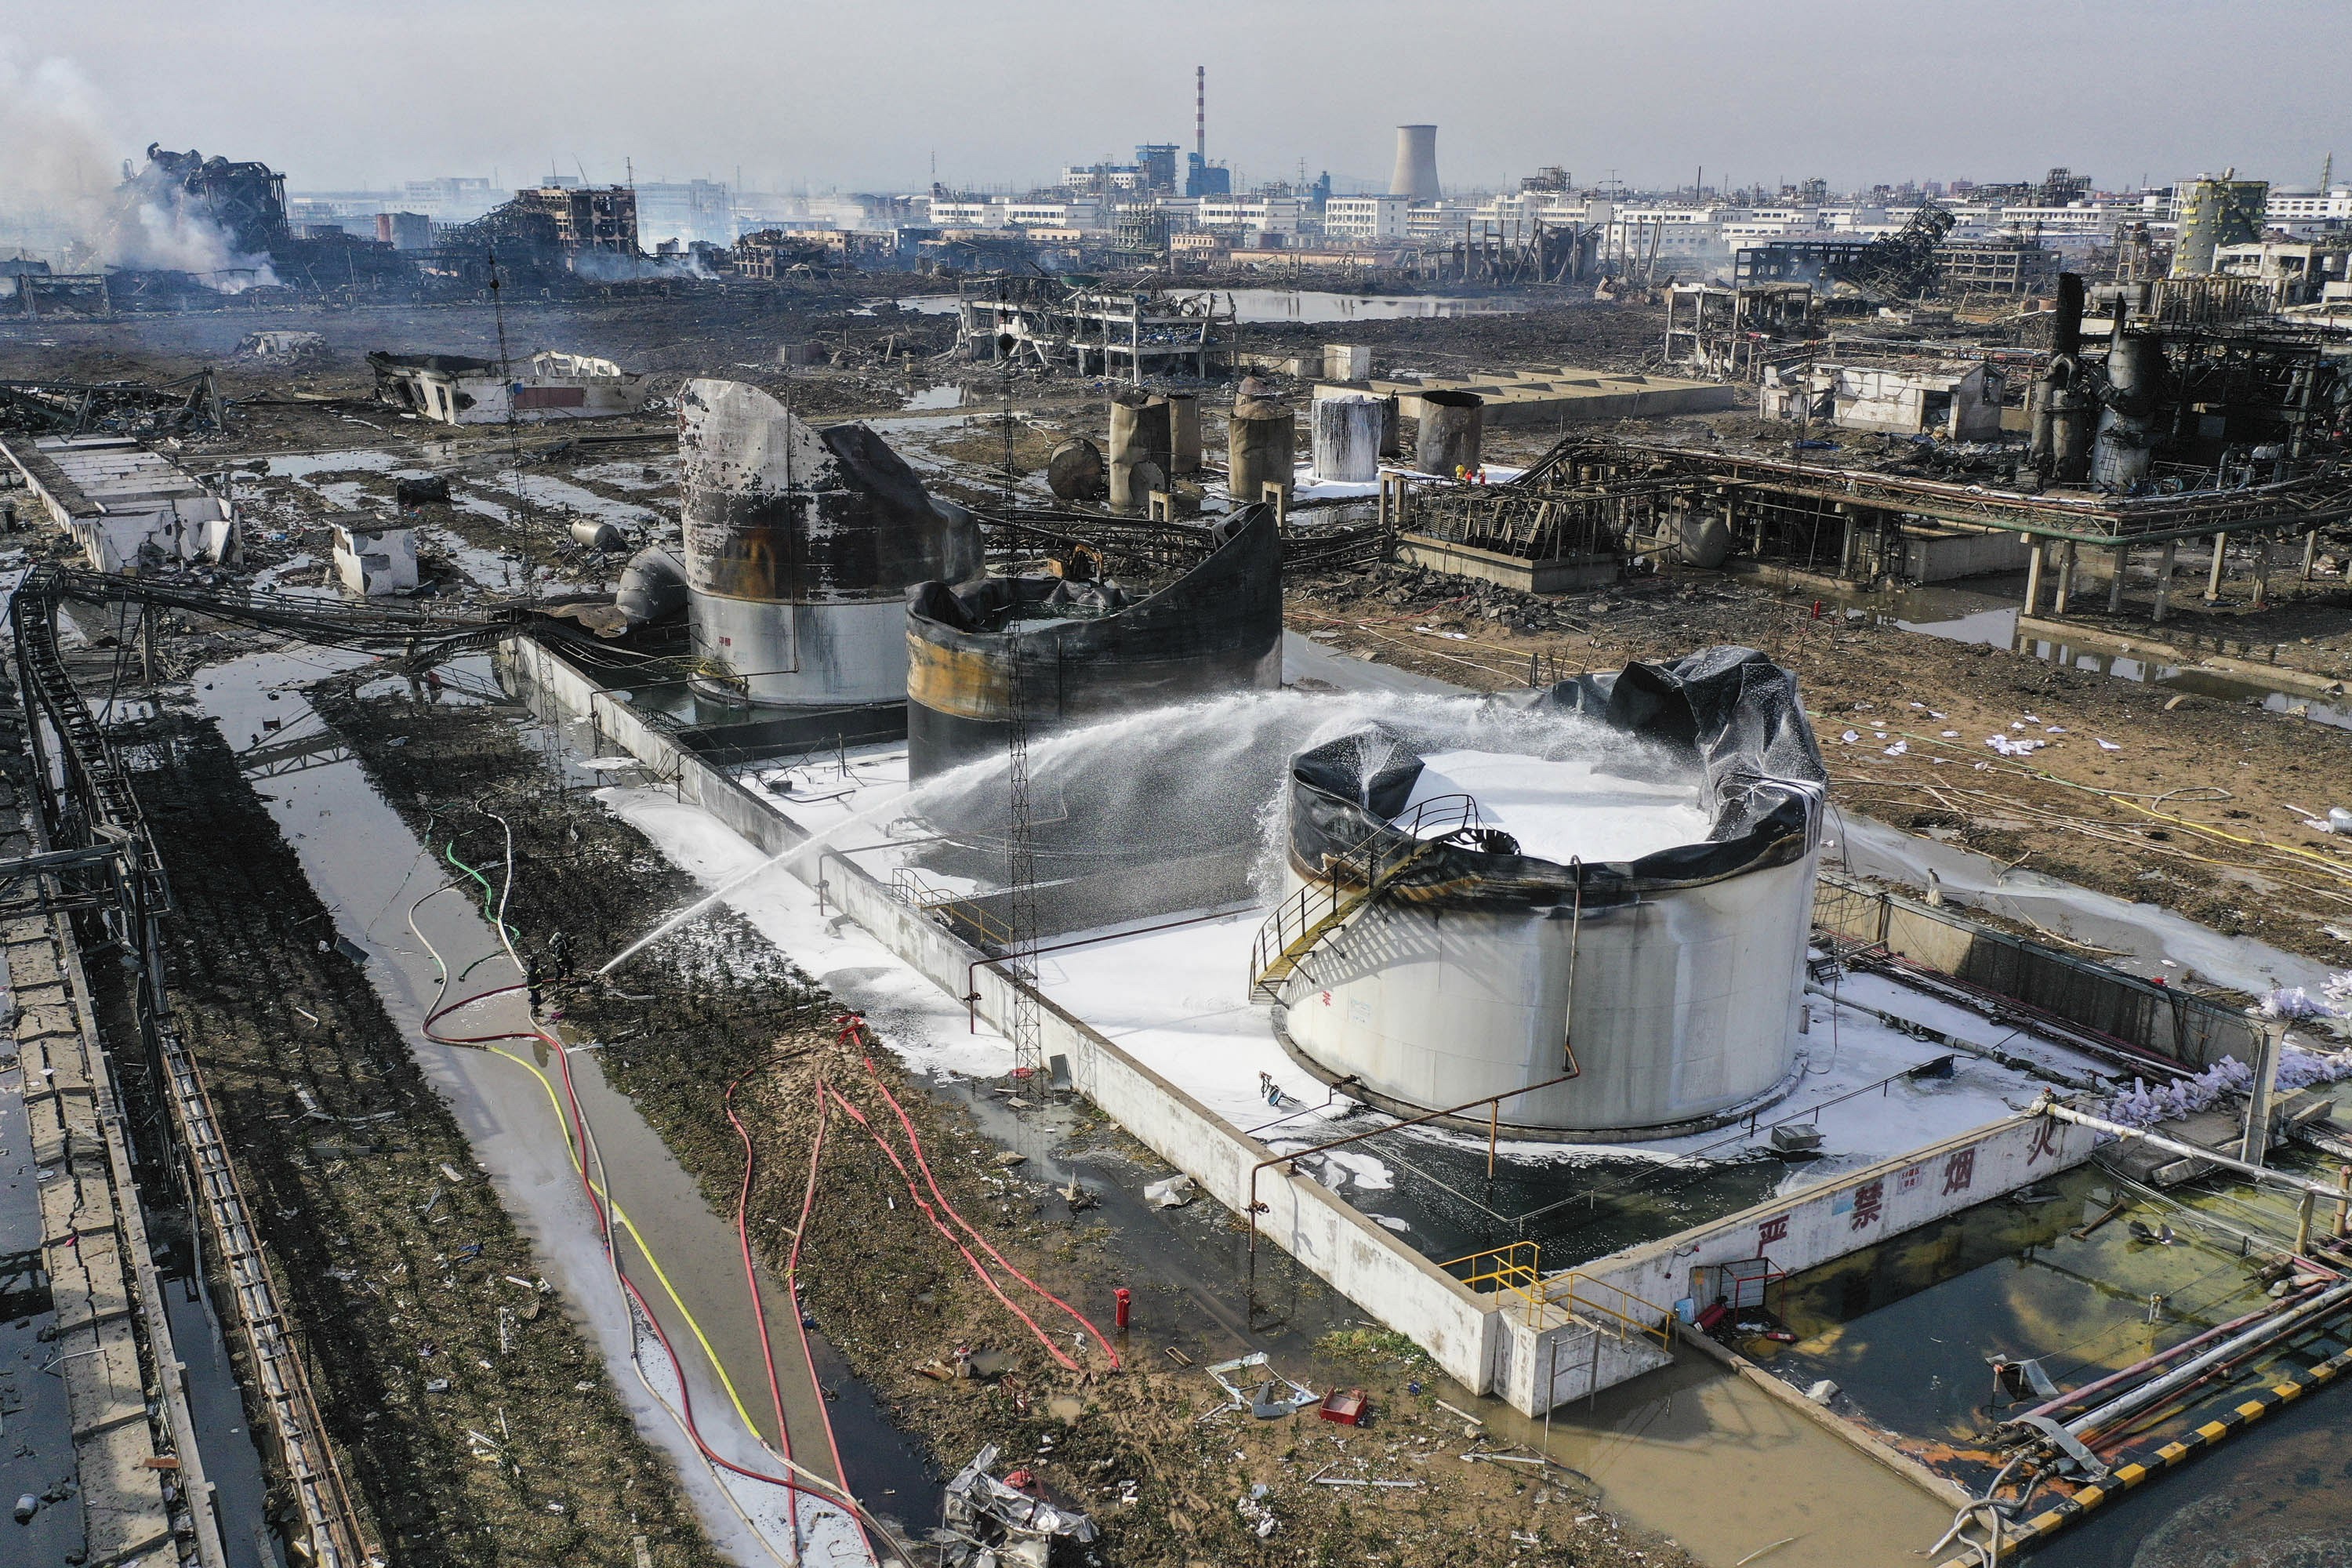 A deadly explosion at a plant in Yancheng prompted the latest crackdown. Photo: AP